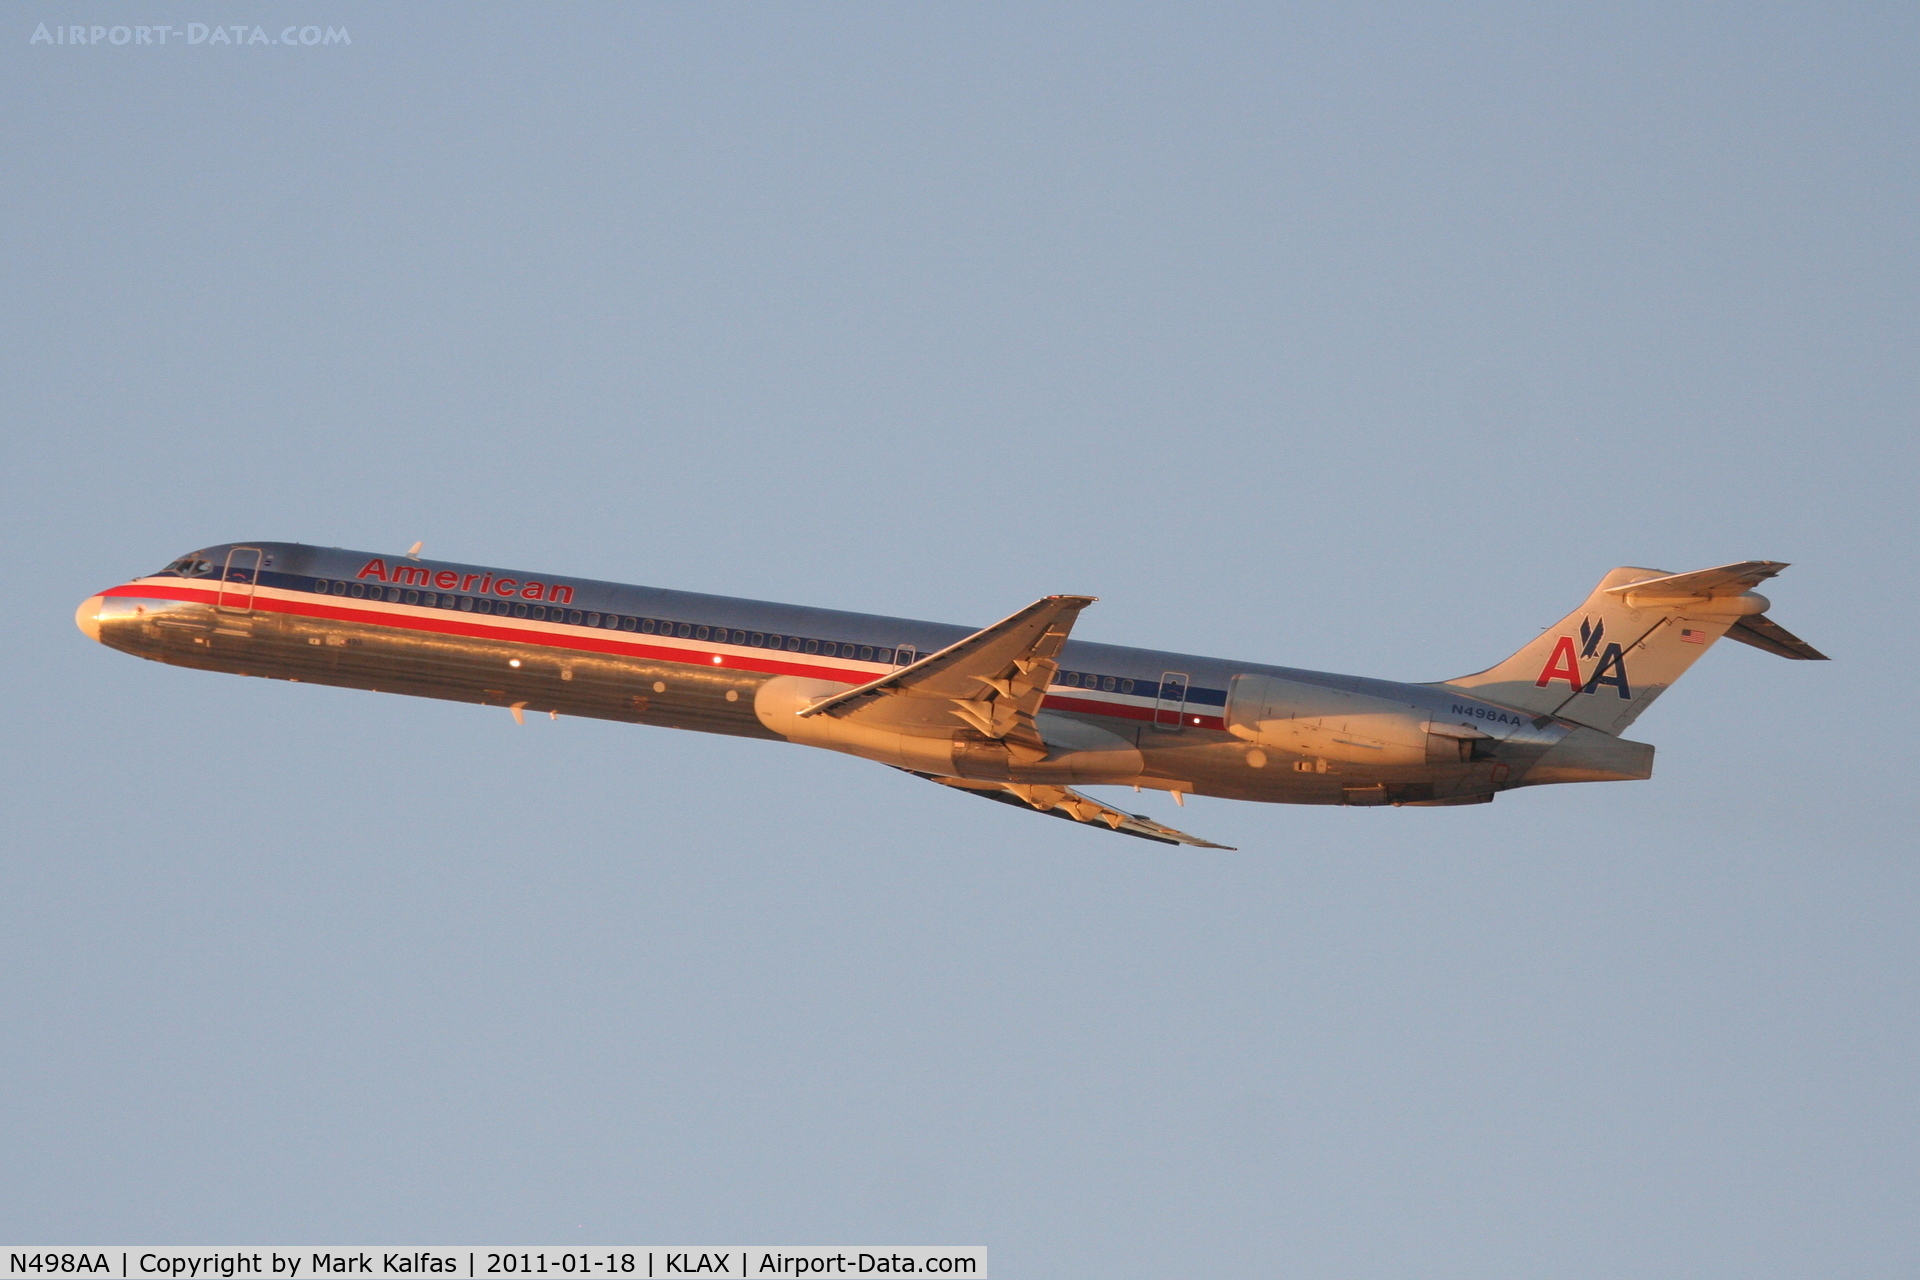 N498AA, 1989 McDonnell Douglas MD-82 (DC-9-82) C/N 49736, American Airlines Mcdonnell Douglas DC-9-82, AAL2454 departing RWY 25R KLAX, enroute to KDFW.